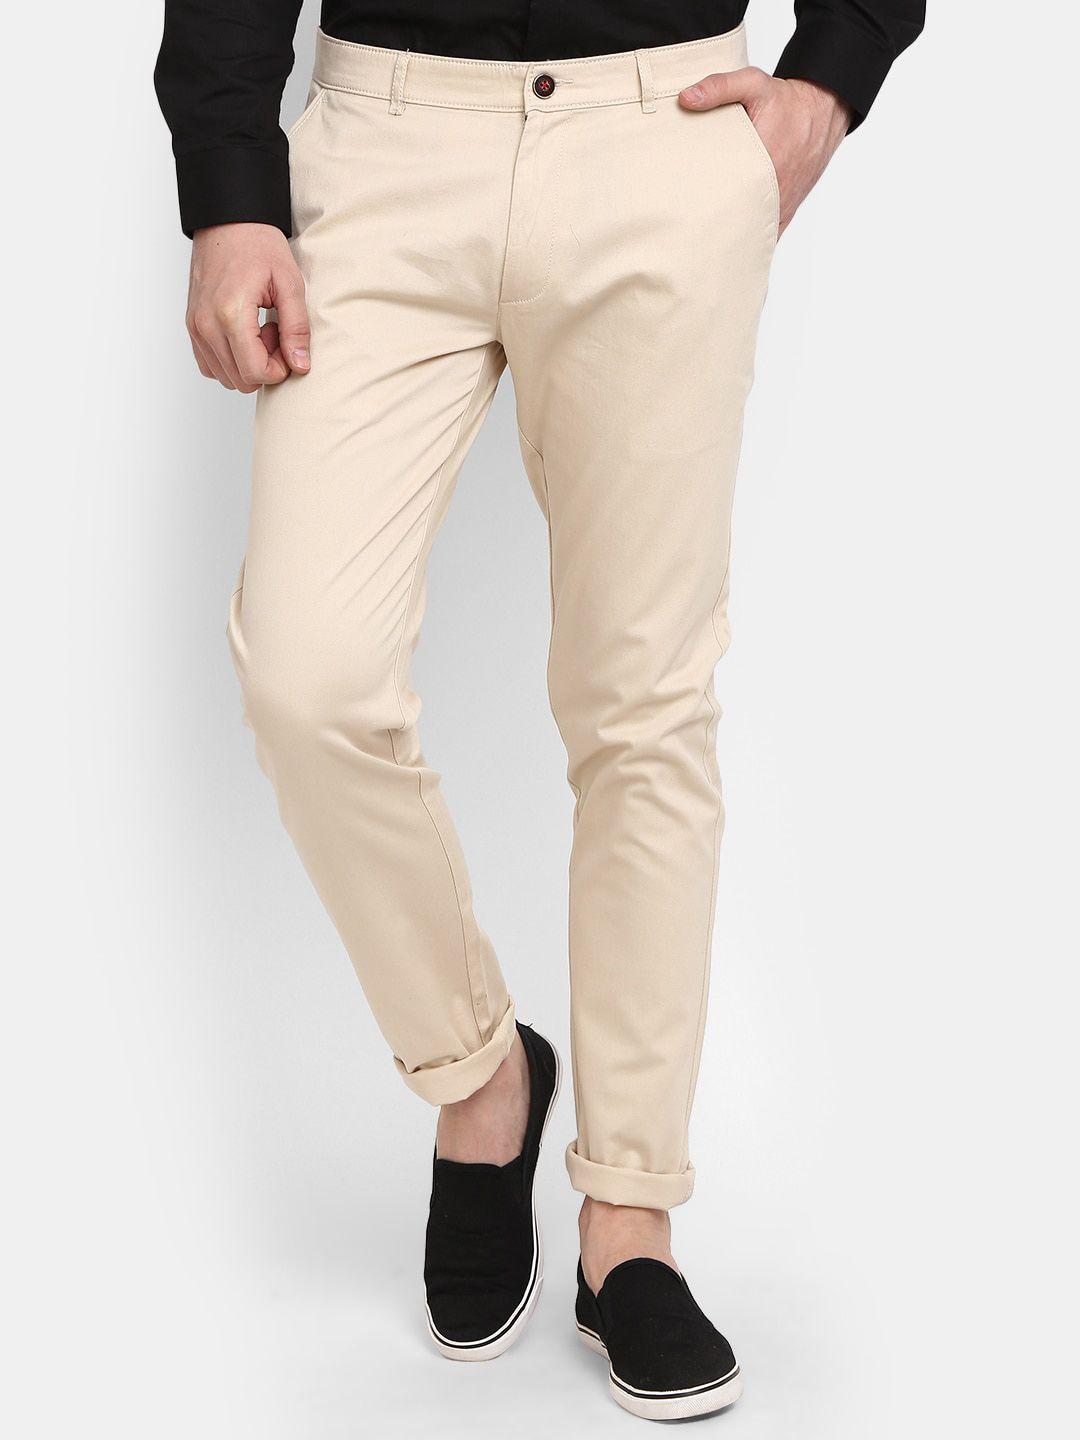 v-mart men cotton classic slim fit chinos trousers